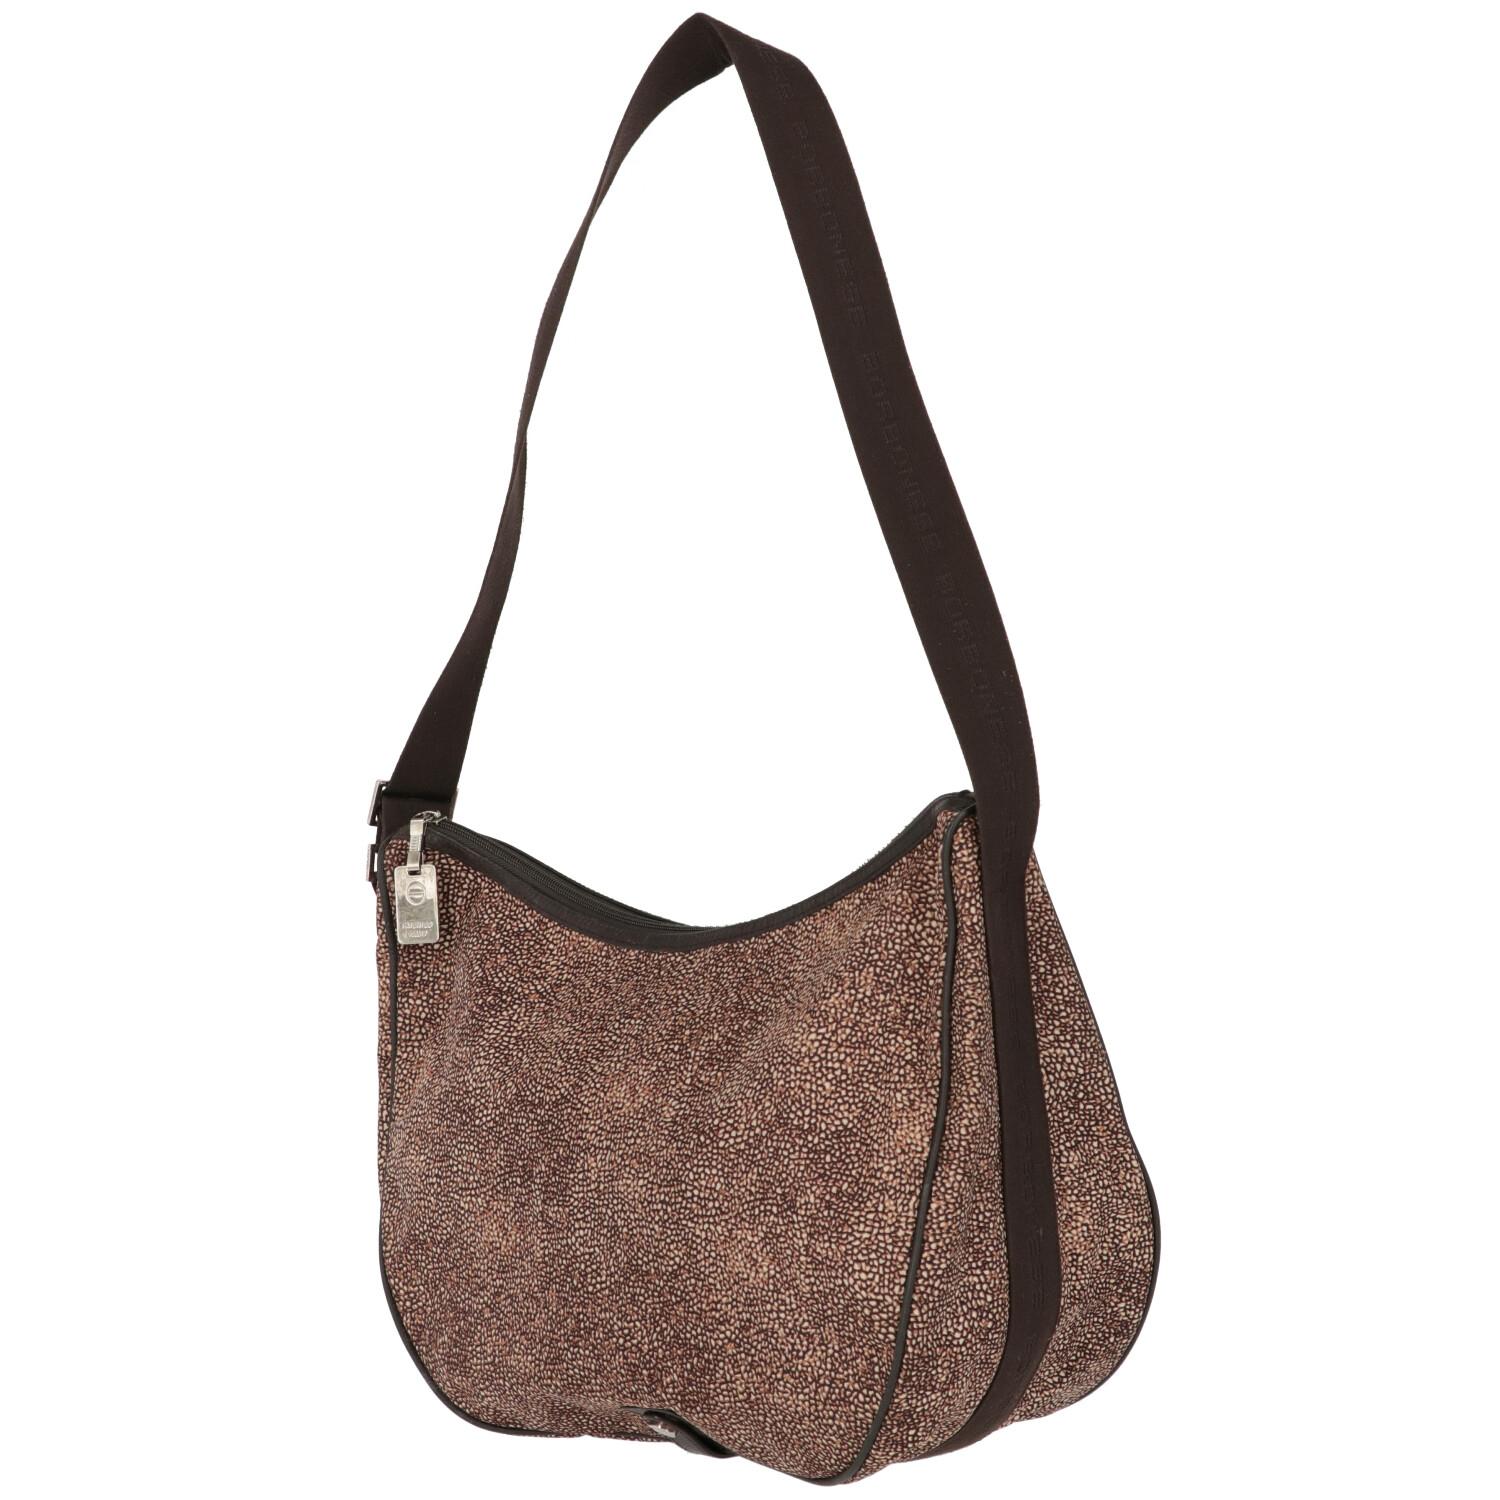 Borbonese brown fabric with jet op print Luna bag. Leather edges, logoed cotton ribbon shoulder strap with self-locking buckle, zip closure and metal tie road. Inside there are two zipped cosmetic bags.

Width: 39 cm
Height: 28 cm
Depth: 19